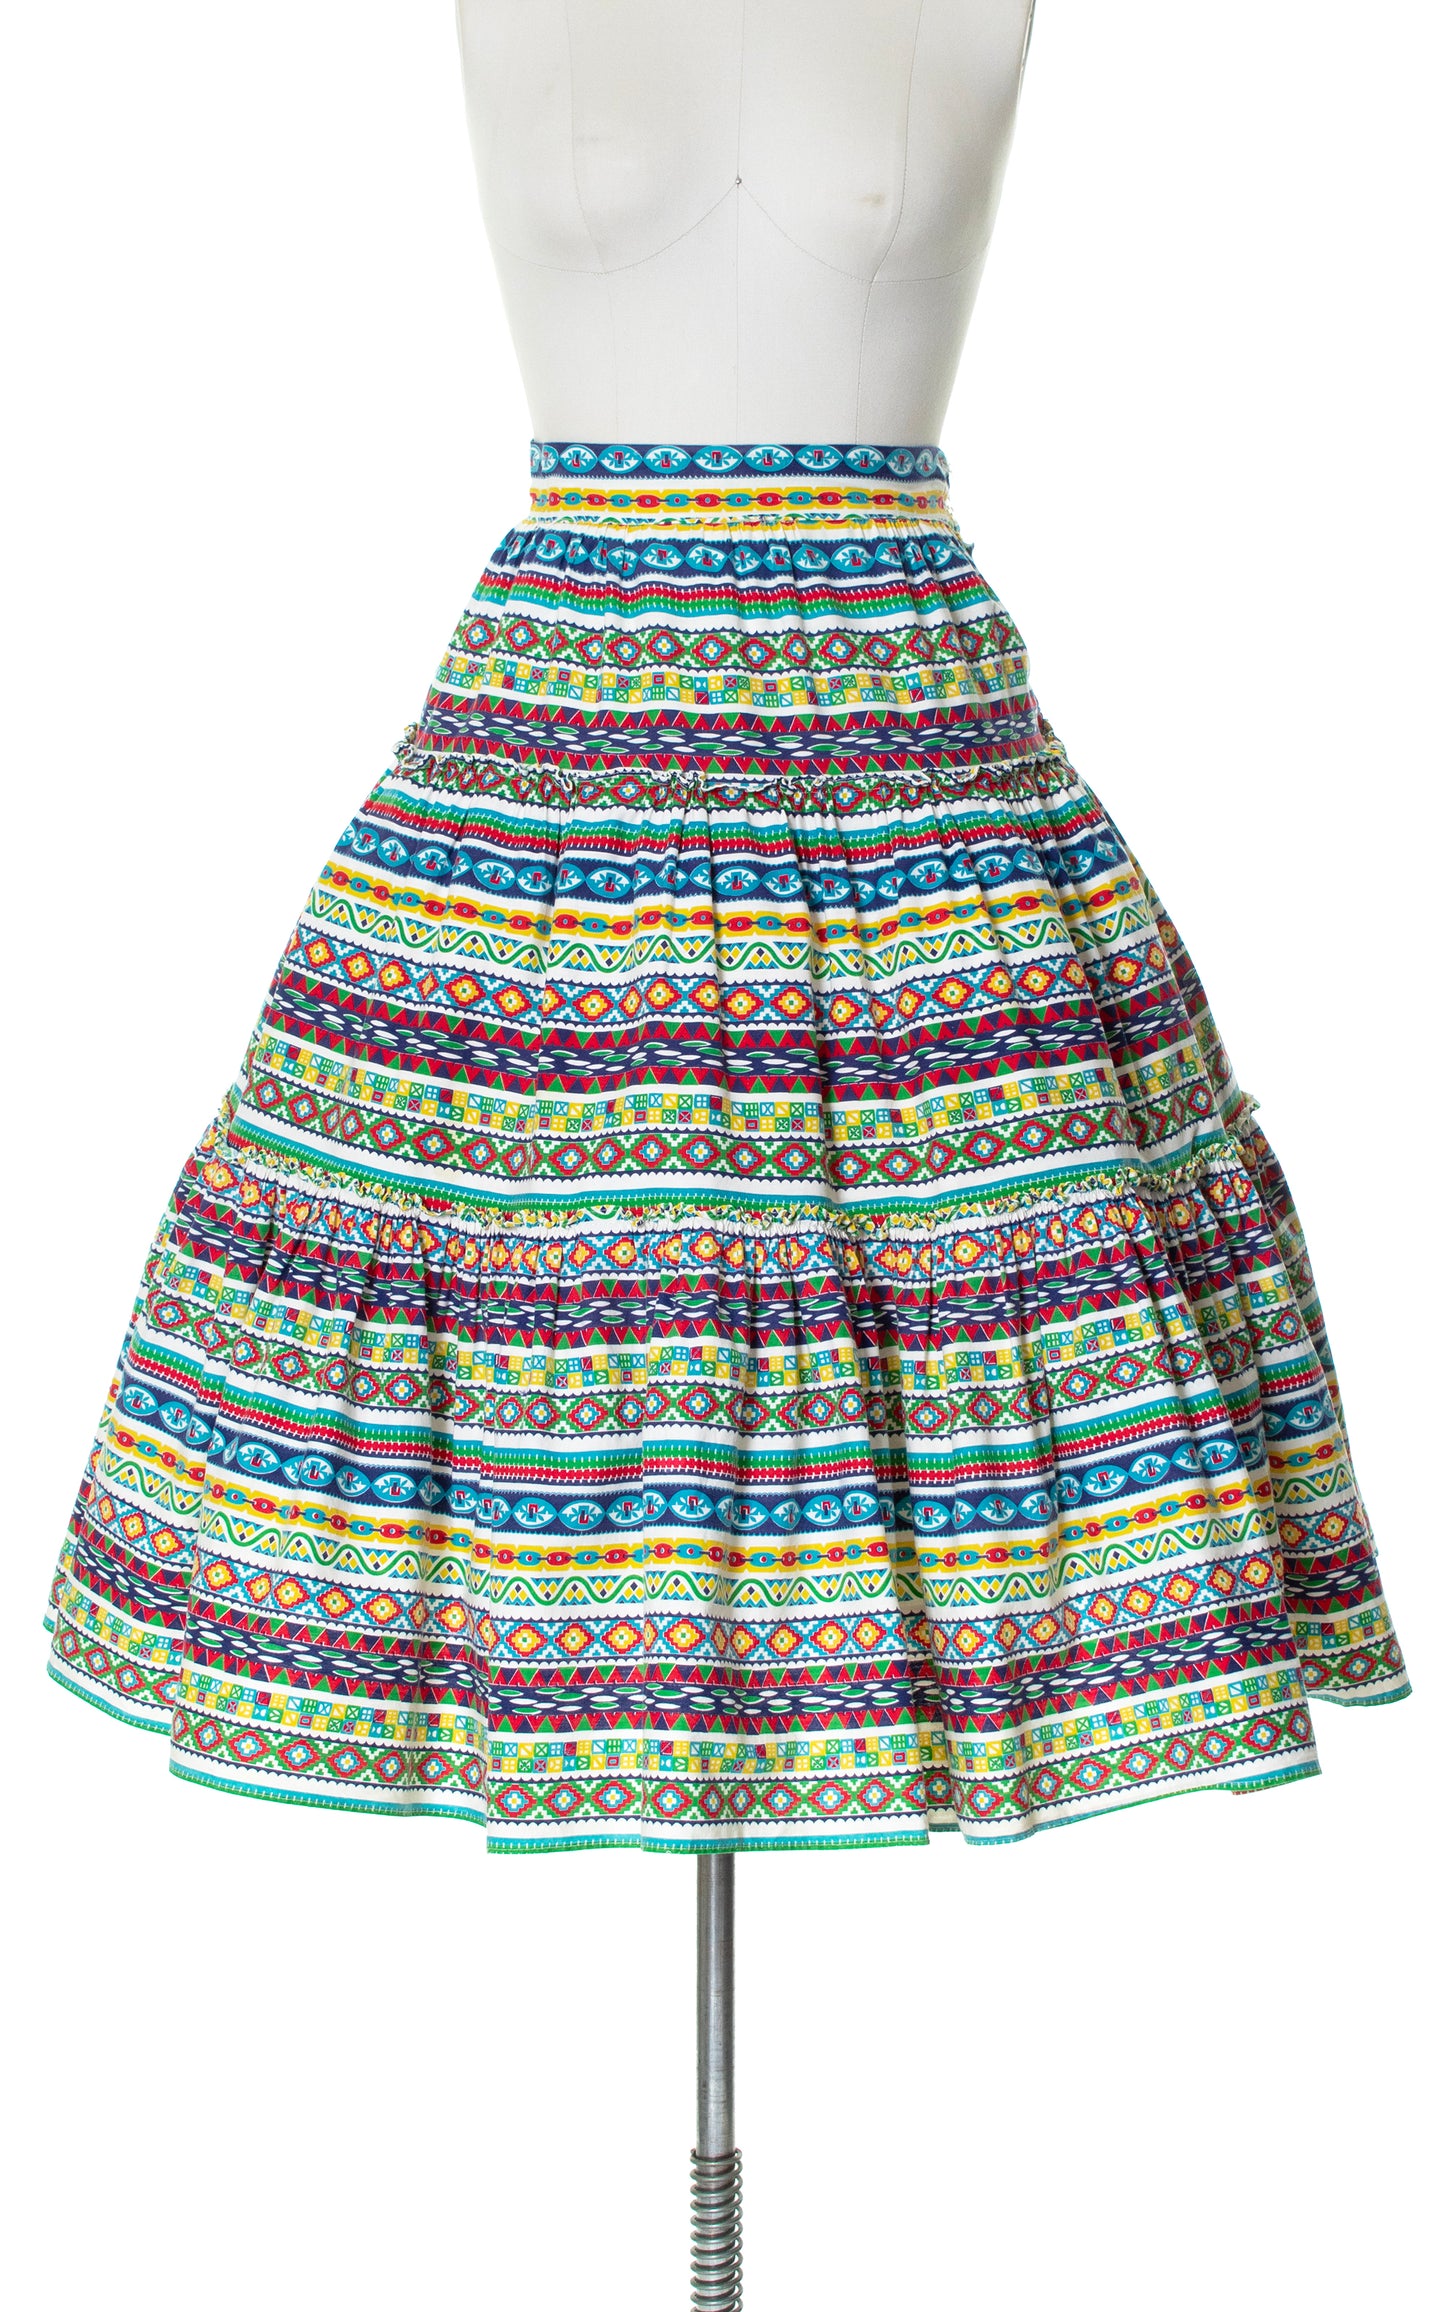 Vintage 50s 1950s Southwestern Geometric Striped Tiered Cotton Full High Waisted Skirt BirthdayLifeVintage